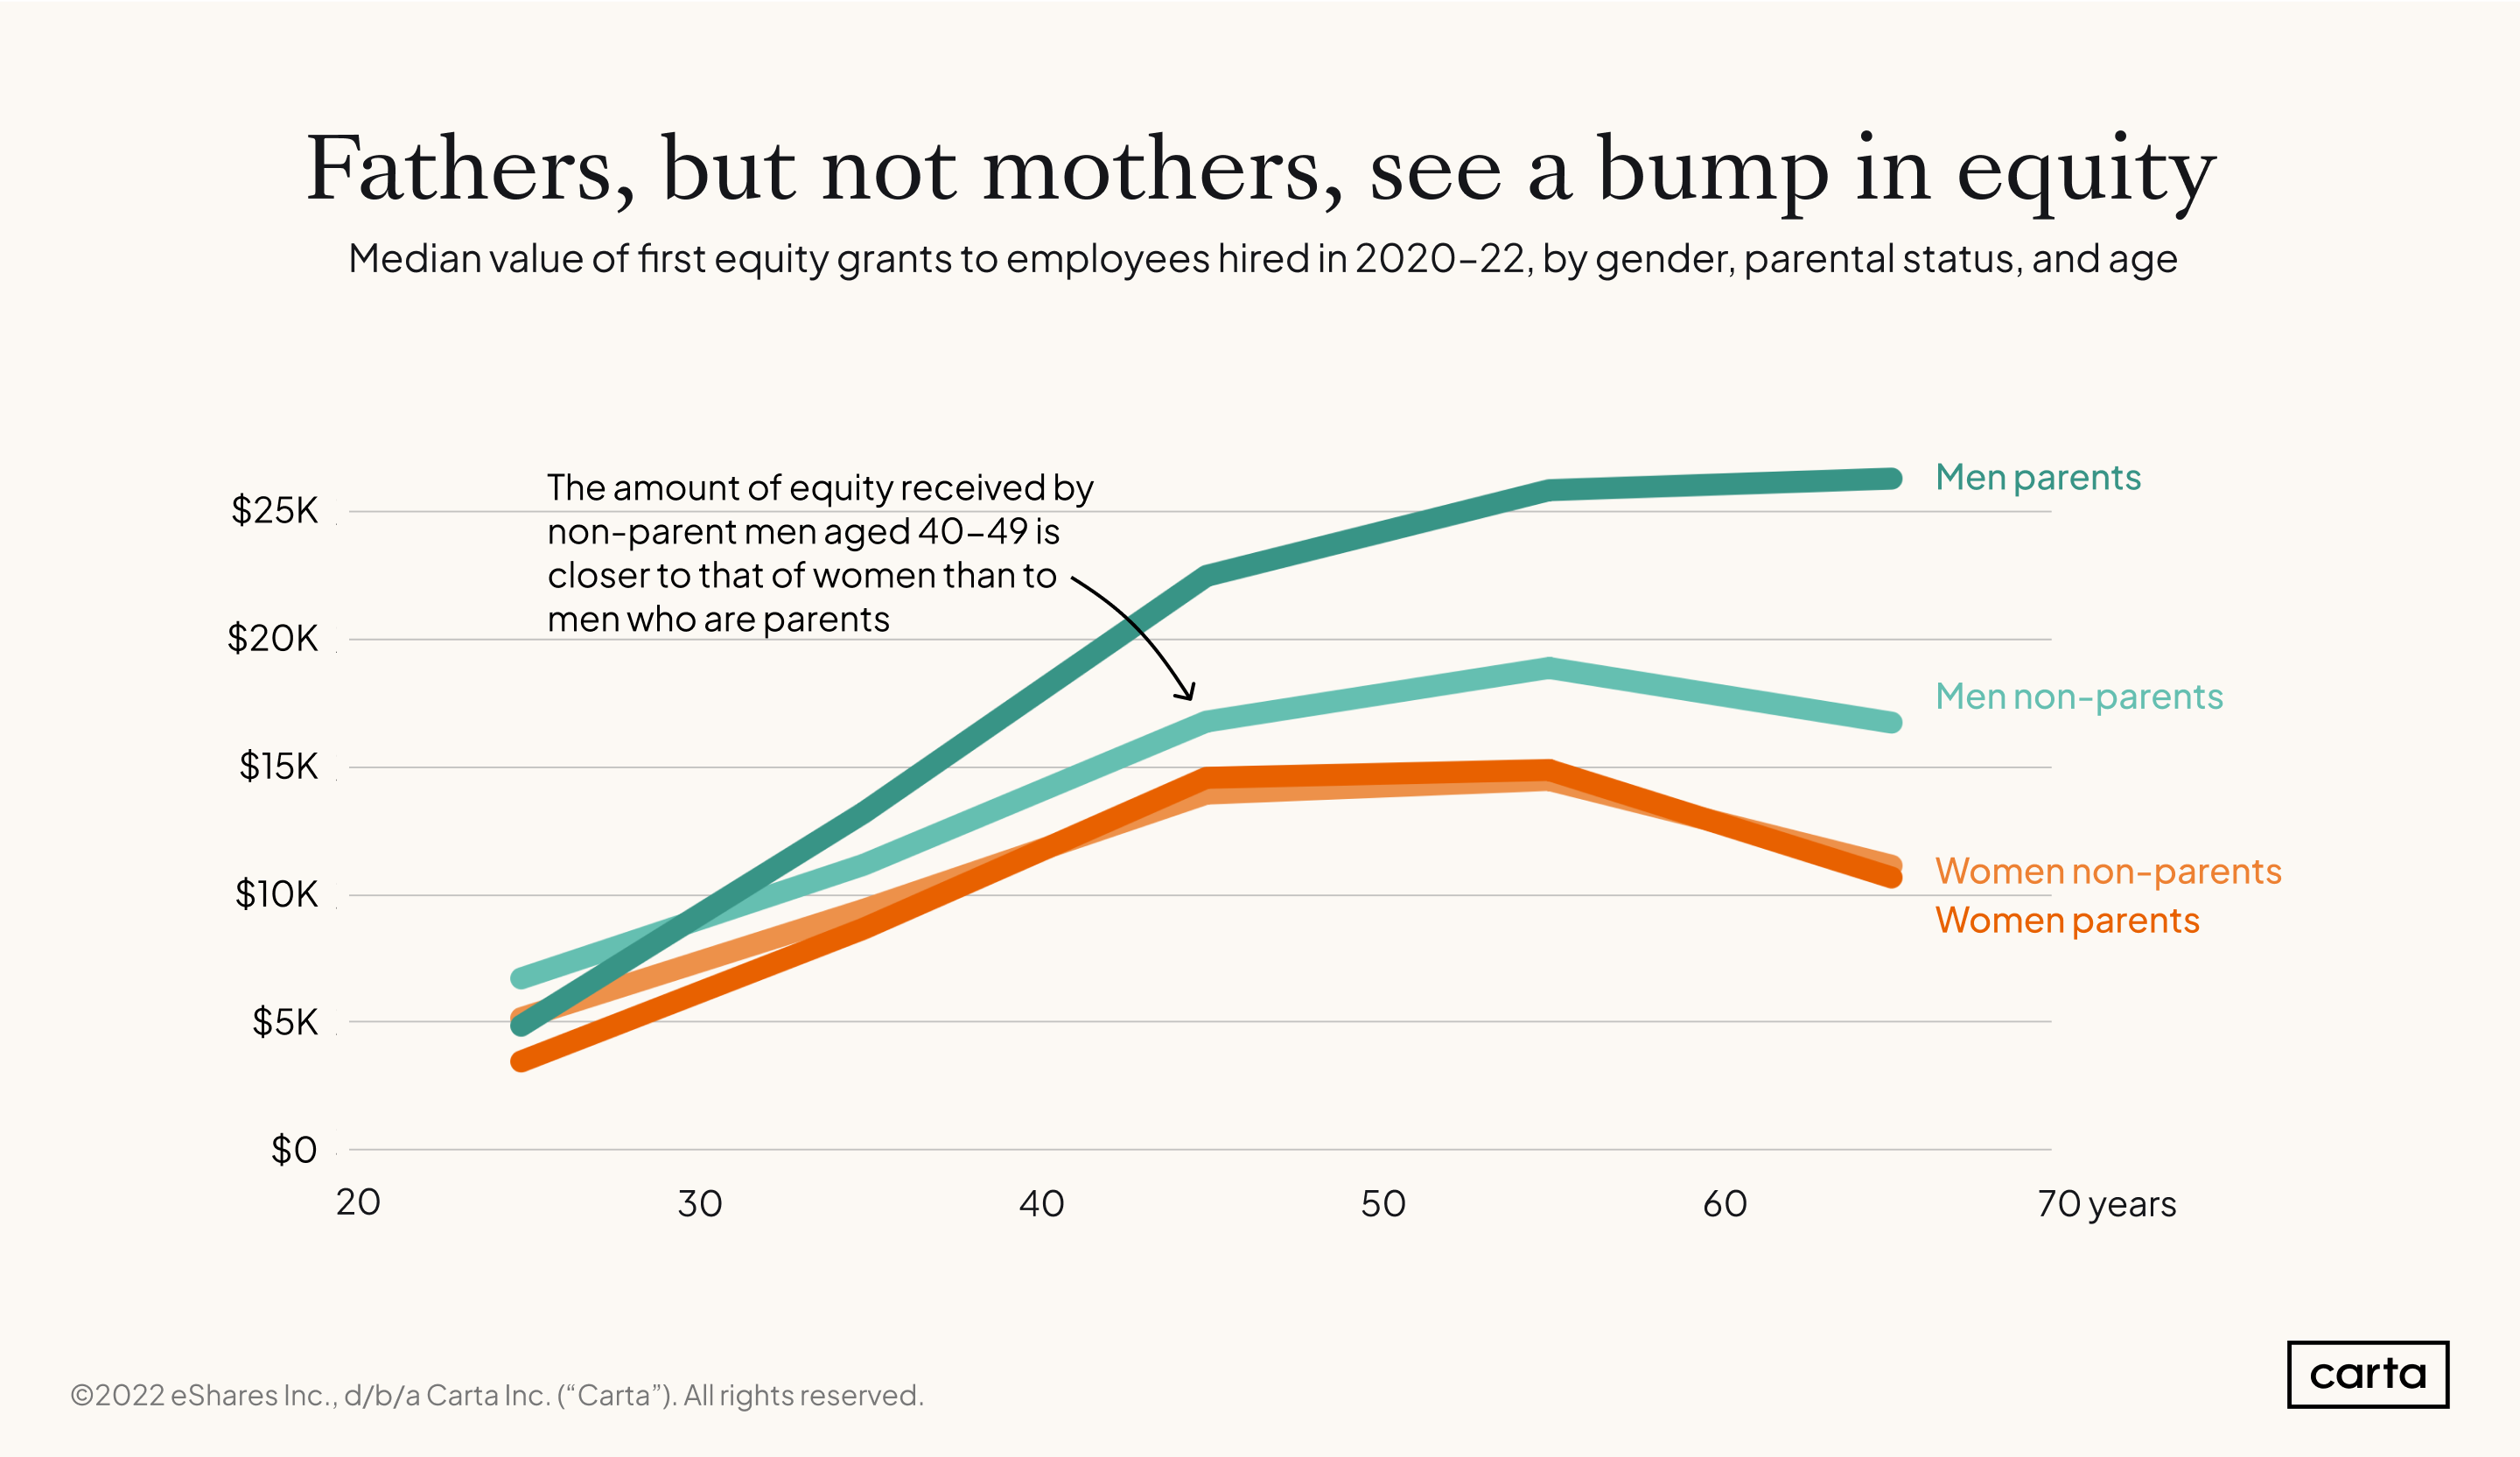 CES Equity by age, gender, and parental status